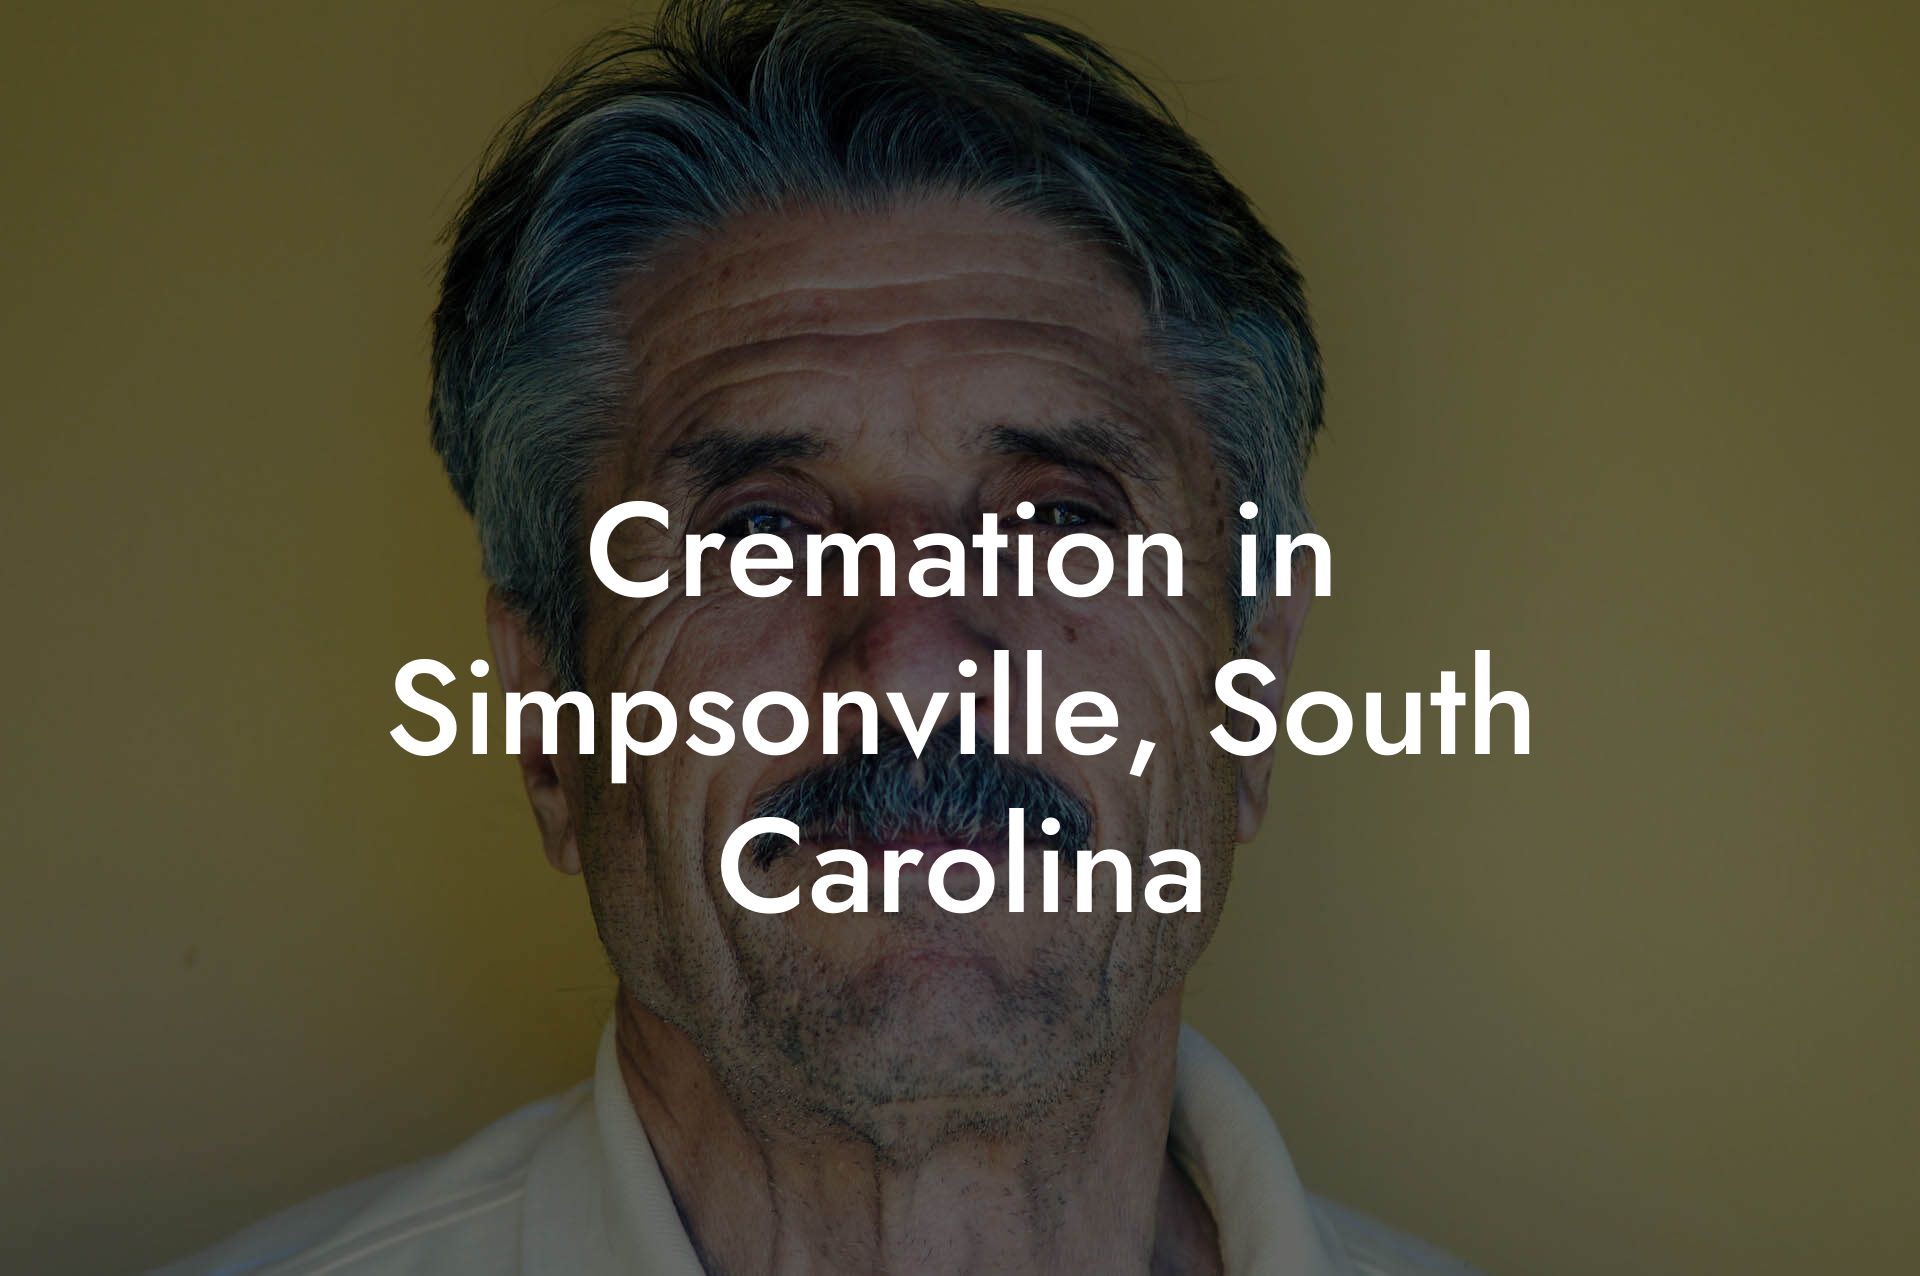 Cremation in Simpsonville, South Carolina